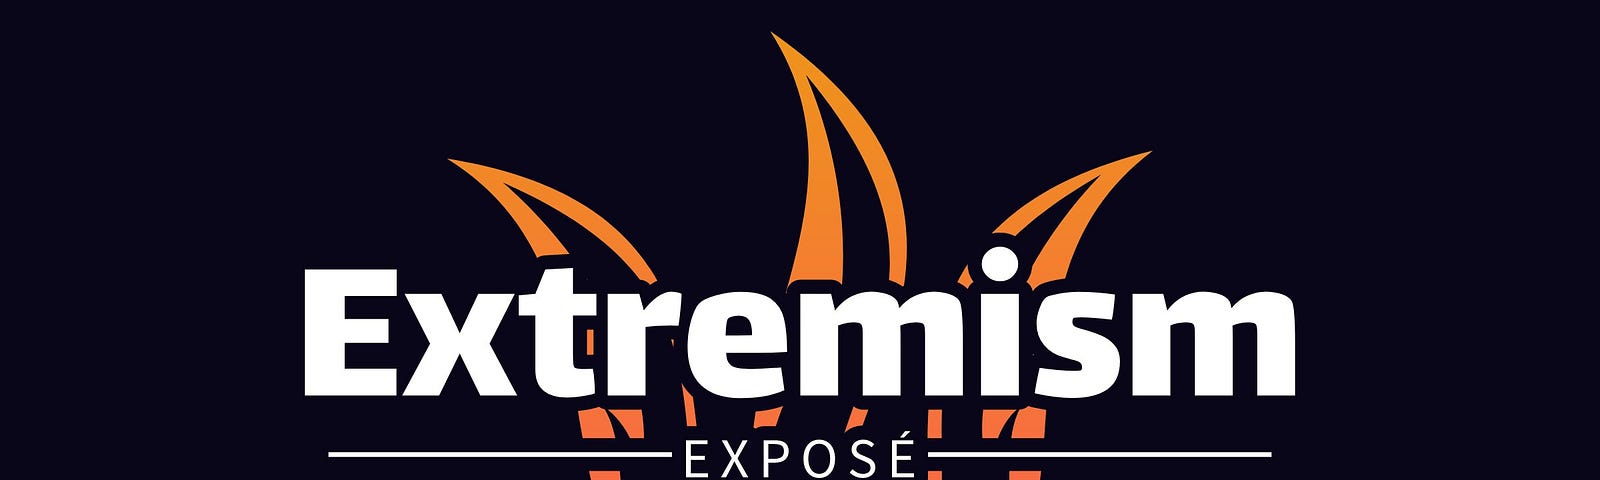 The logo features the text “Extremism Exposé” prominently in the center. The word “Extremism” is in bold white letters, with “Exposé” in smaller white letters below it, separated by a horizontal line. Behind the text are stylized orange and red flames, suggesting the fiery nature of the topic. The background is dark, creating a strong contrast that makes the text and flames stand out vividly.